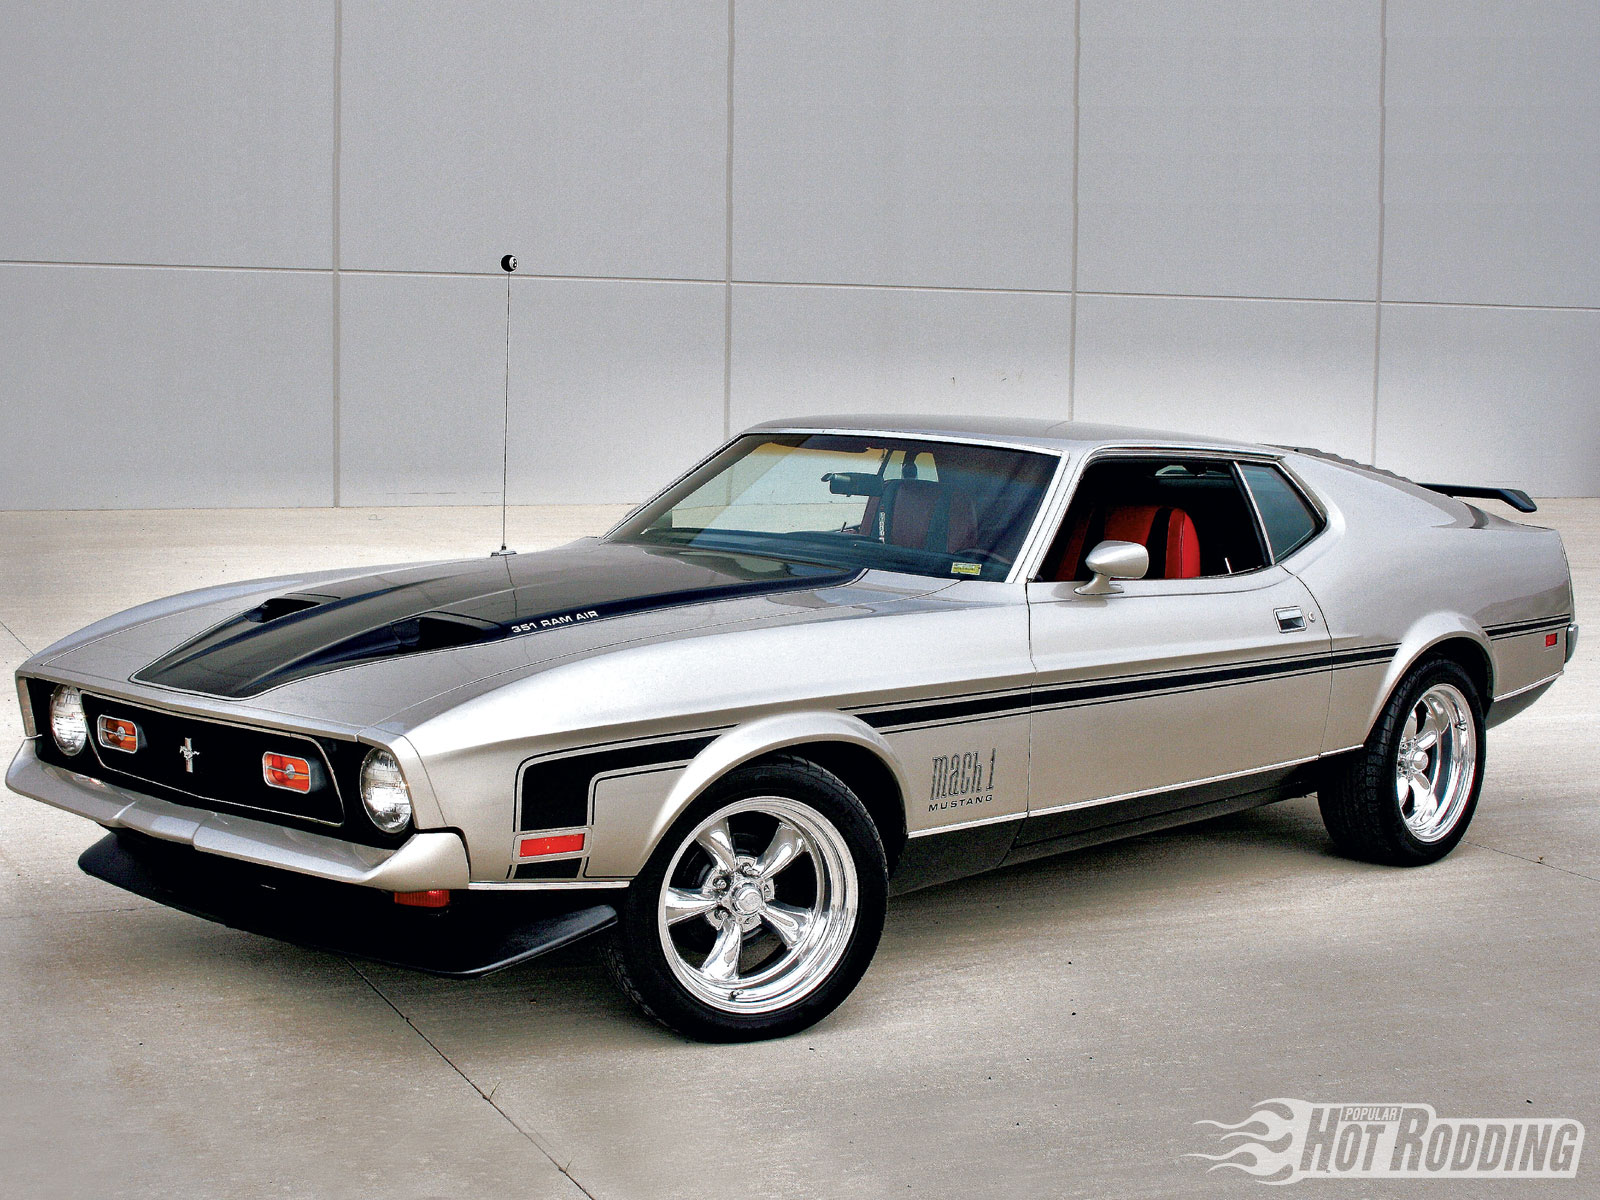 Vehicles Ford Mustang Mach 1 HD Wallpaper | Background Image